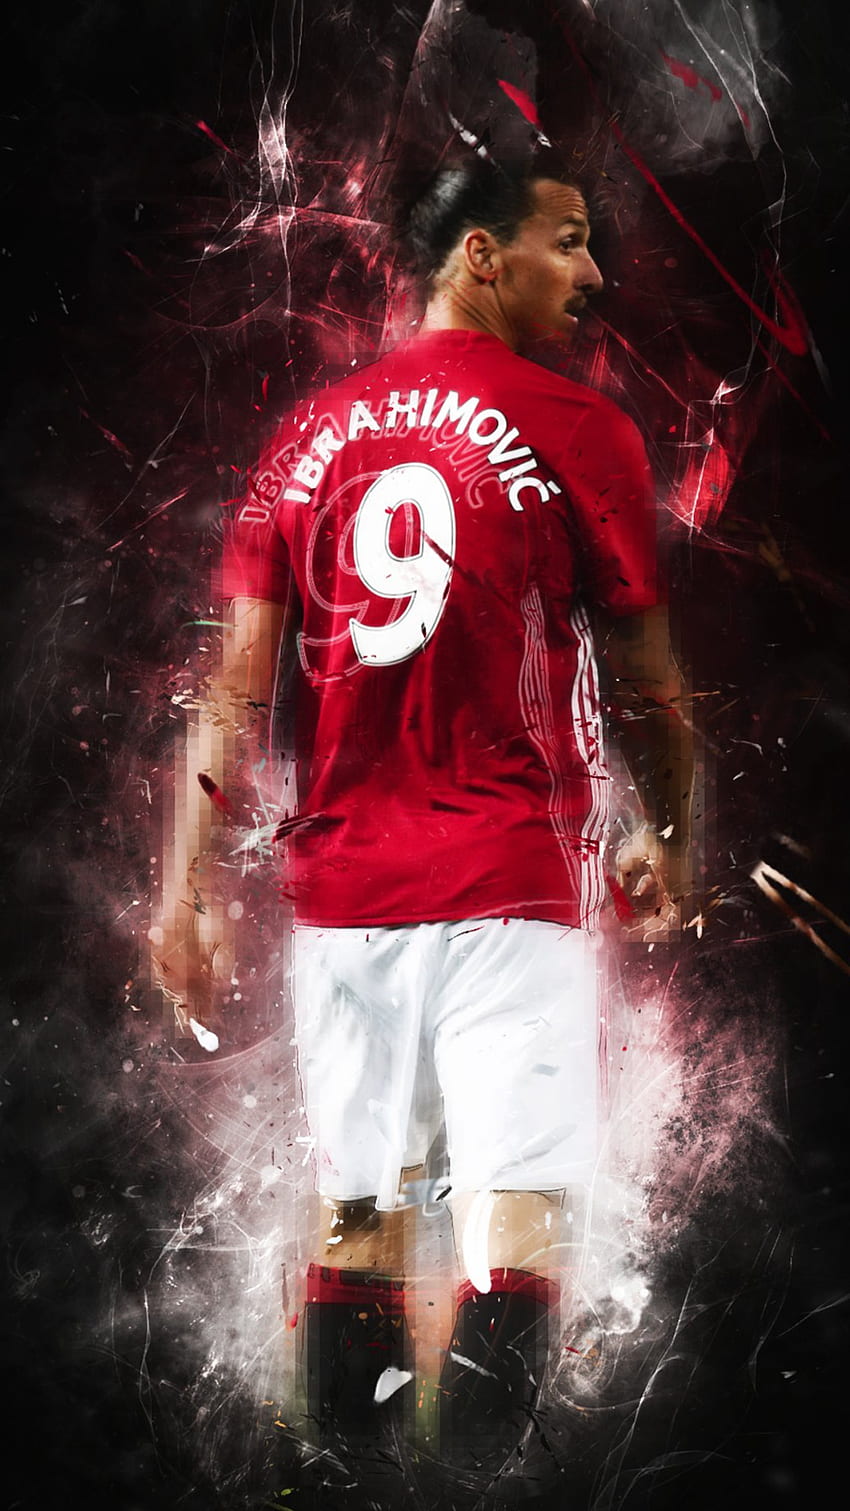 Ibrahimovic Manchester United PL Premier League 9 Red Devil 2016 2017 Europa League Adidas Football Soccer wallpaper ponsel HD